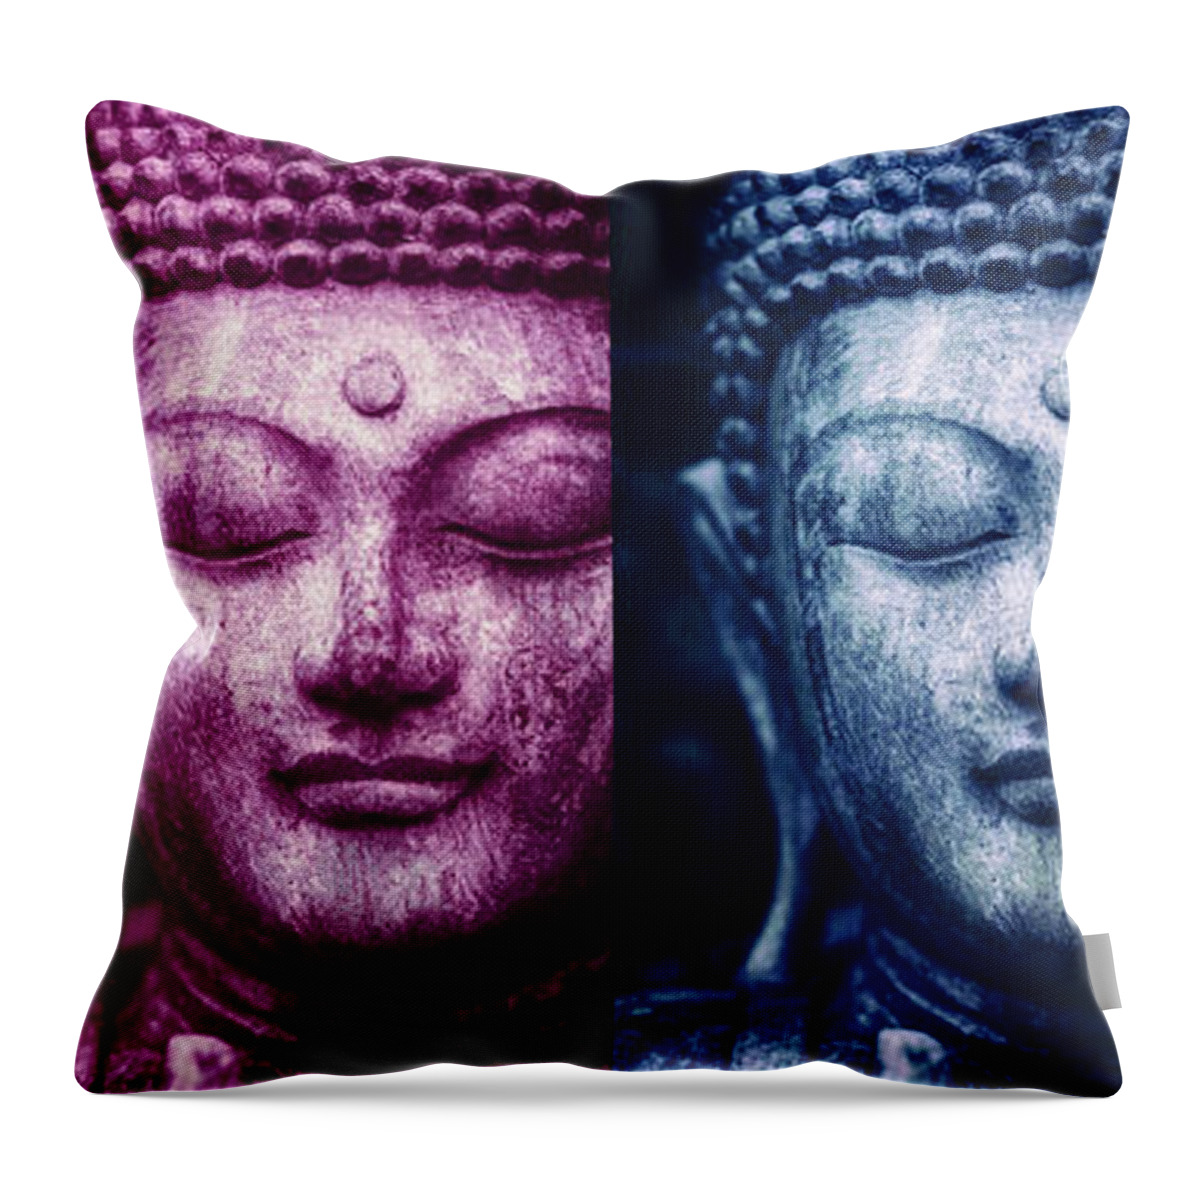 Buddha Throw Pillow featuring the photograph Concentration Contemplation Meditation by Tim Gainey